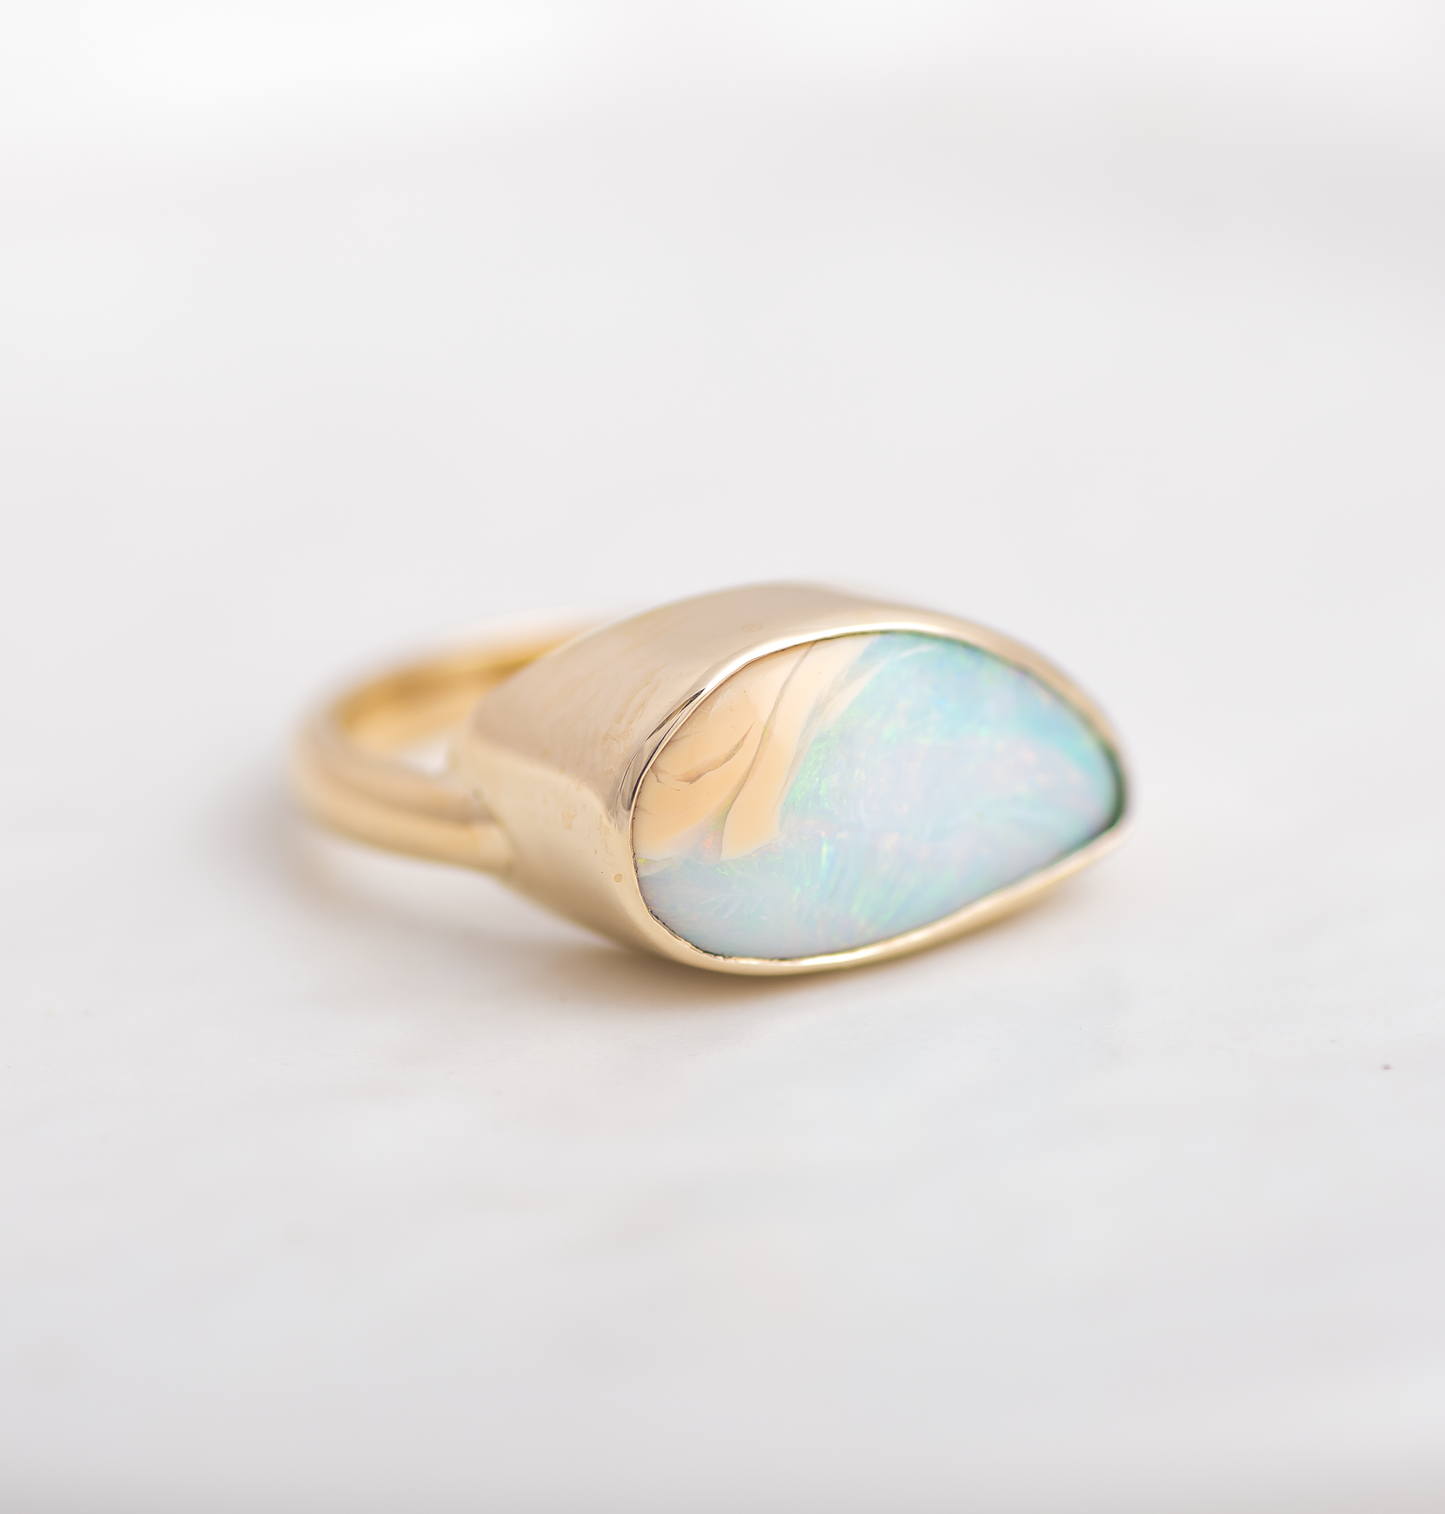 Opal East West Ring #15 ◇ Australian Opal ◇ Made in your size.